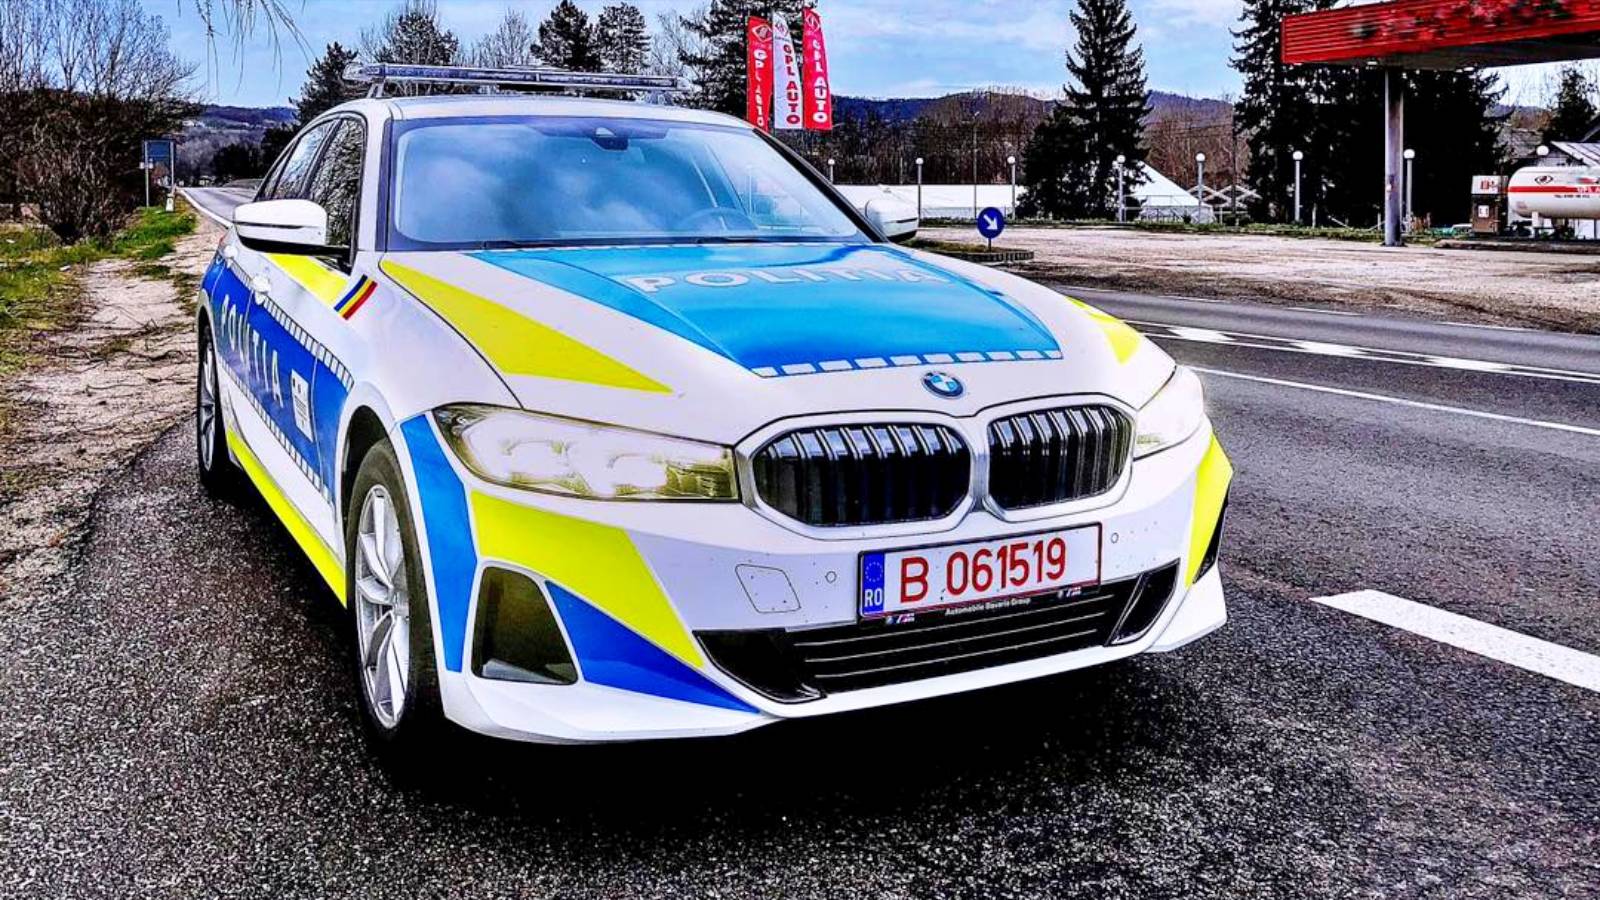 Warning of the Romanian Police regarding Driving under the Influence of Alcohol or Drugs